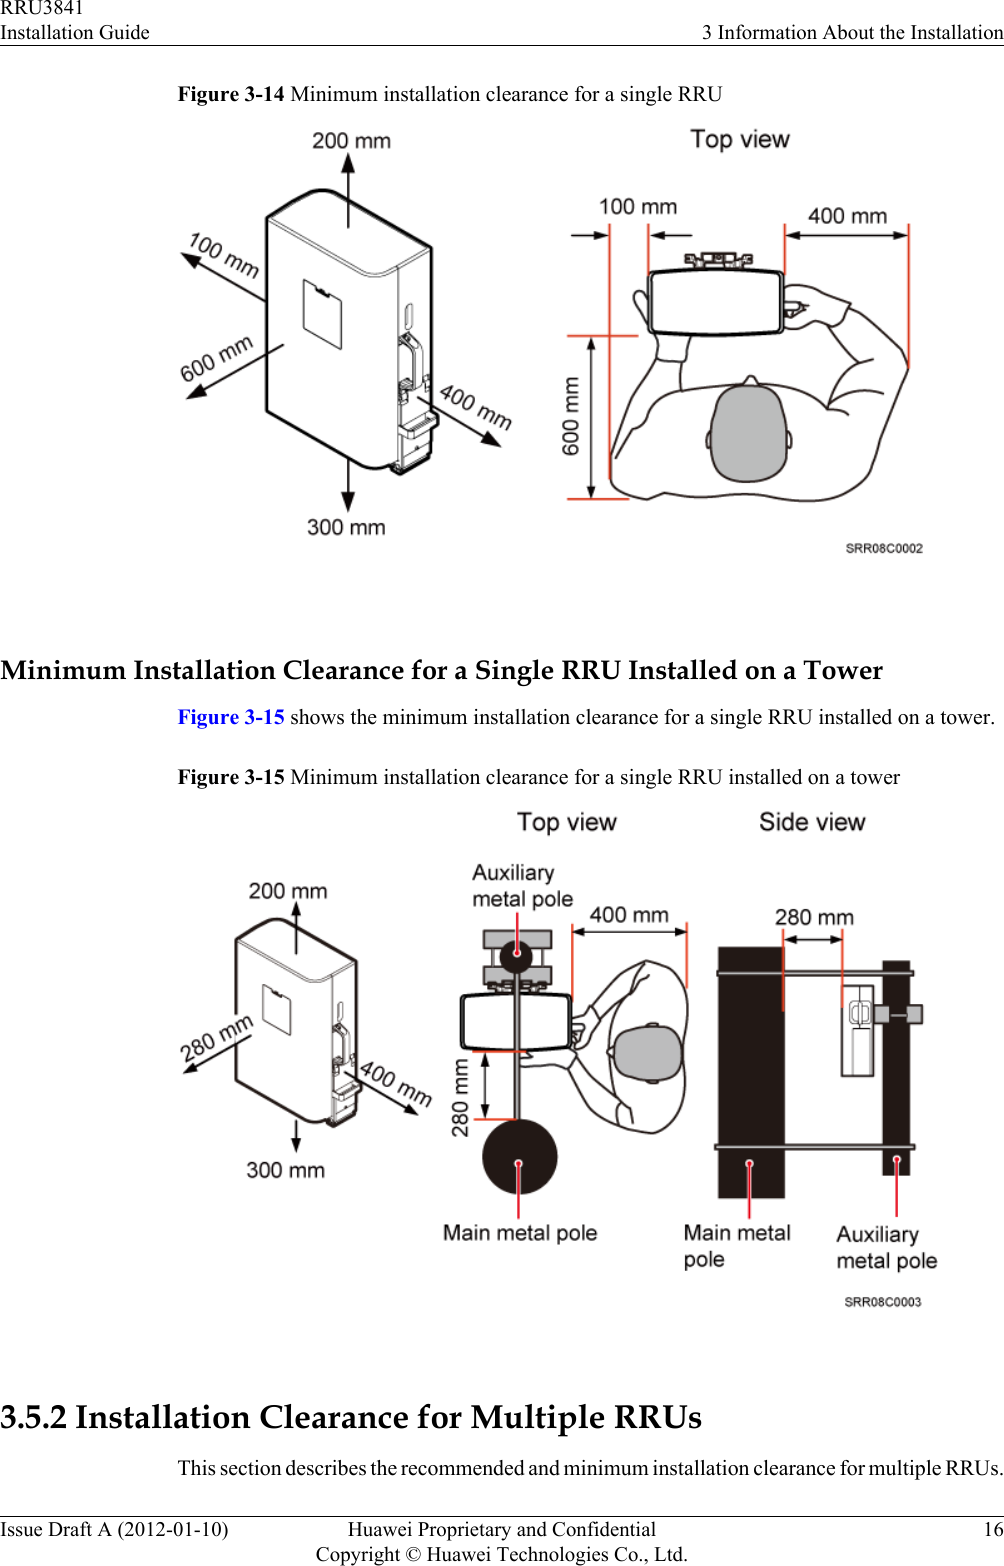 Figure 3-14 Minimum installation clearance for a single RRU Minimum Installation Clearance for a Single RRU Installed on a TowerFigure 3-15 shows the minimum installation clearance for a single RRU installed on a tower.Figure 3-15 Minimum installation clearance for a single RRU installed on a tower 3.5.2 Installation Clearance for Multiple RRUsThis section describes the recommended and minimum installation clearance for multiple RRUs.RRU3841Installation Guide 3 Information About the InstallationIssue Draft A (2012-01-10) Huawei Proprietary and ConfidentialCopyright © Huawei Technologies Co., Ltd.16